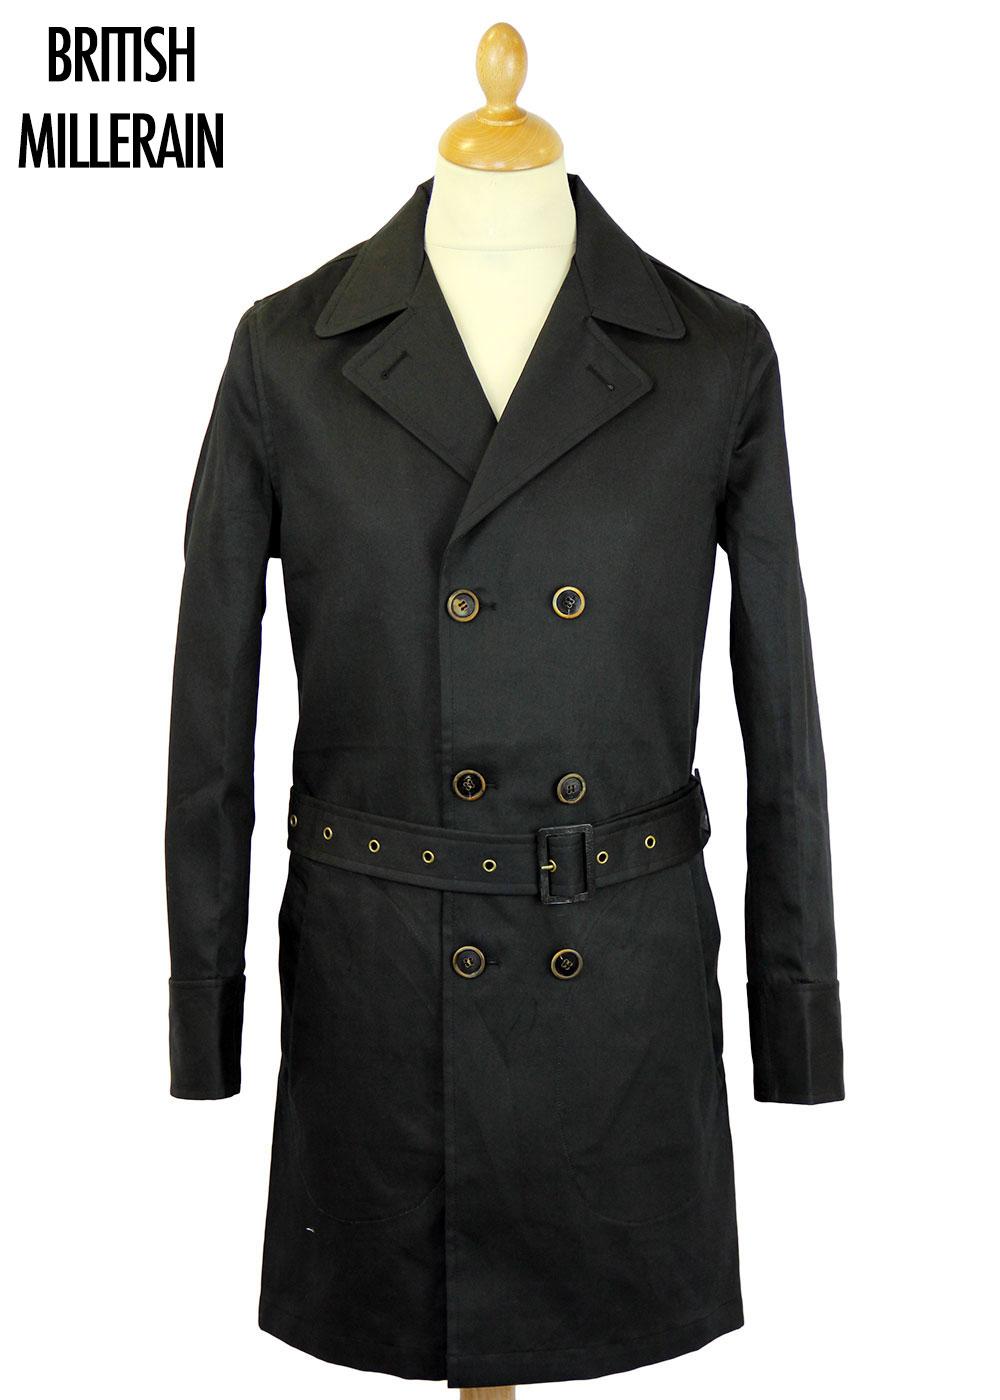 REALM & EMPIRE Retro 60s Mod Belted Officer Trench Coat in Black